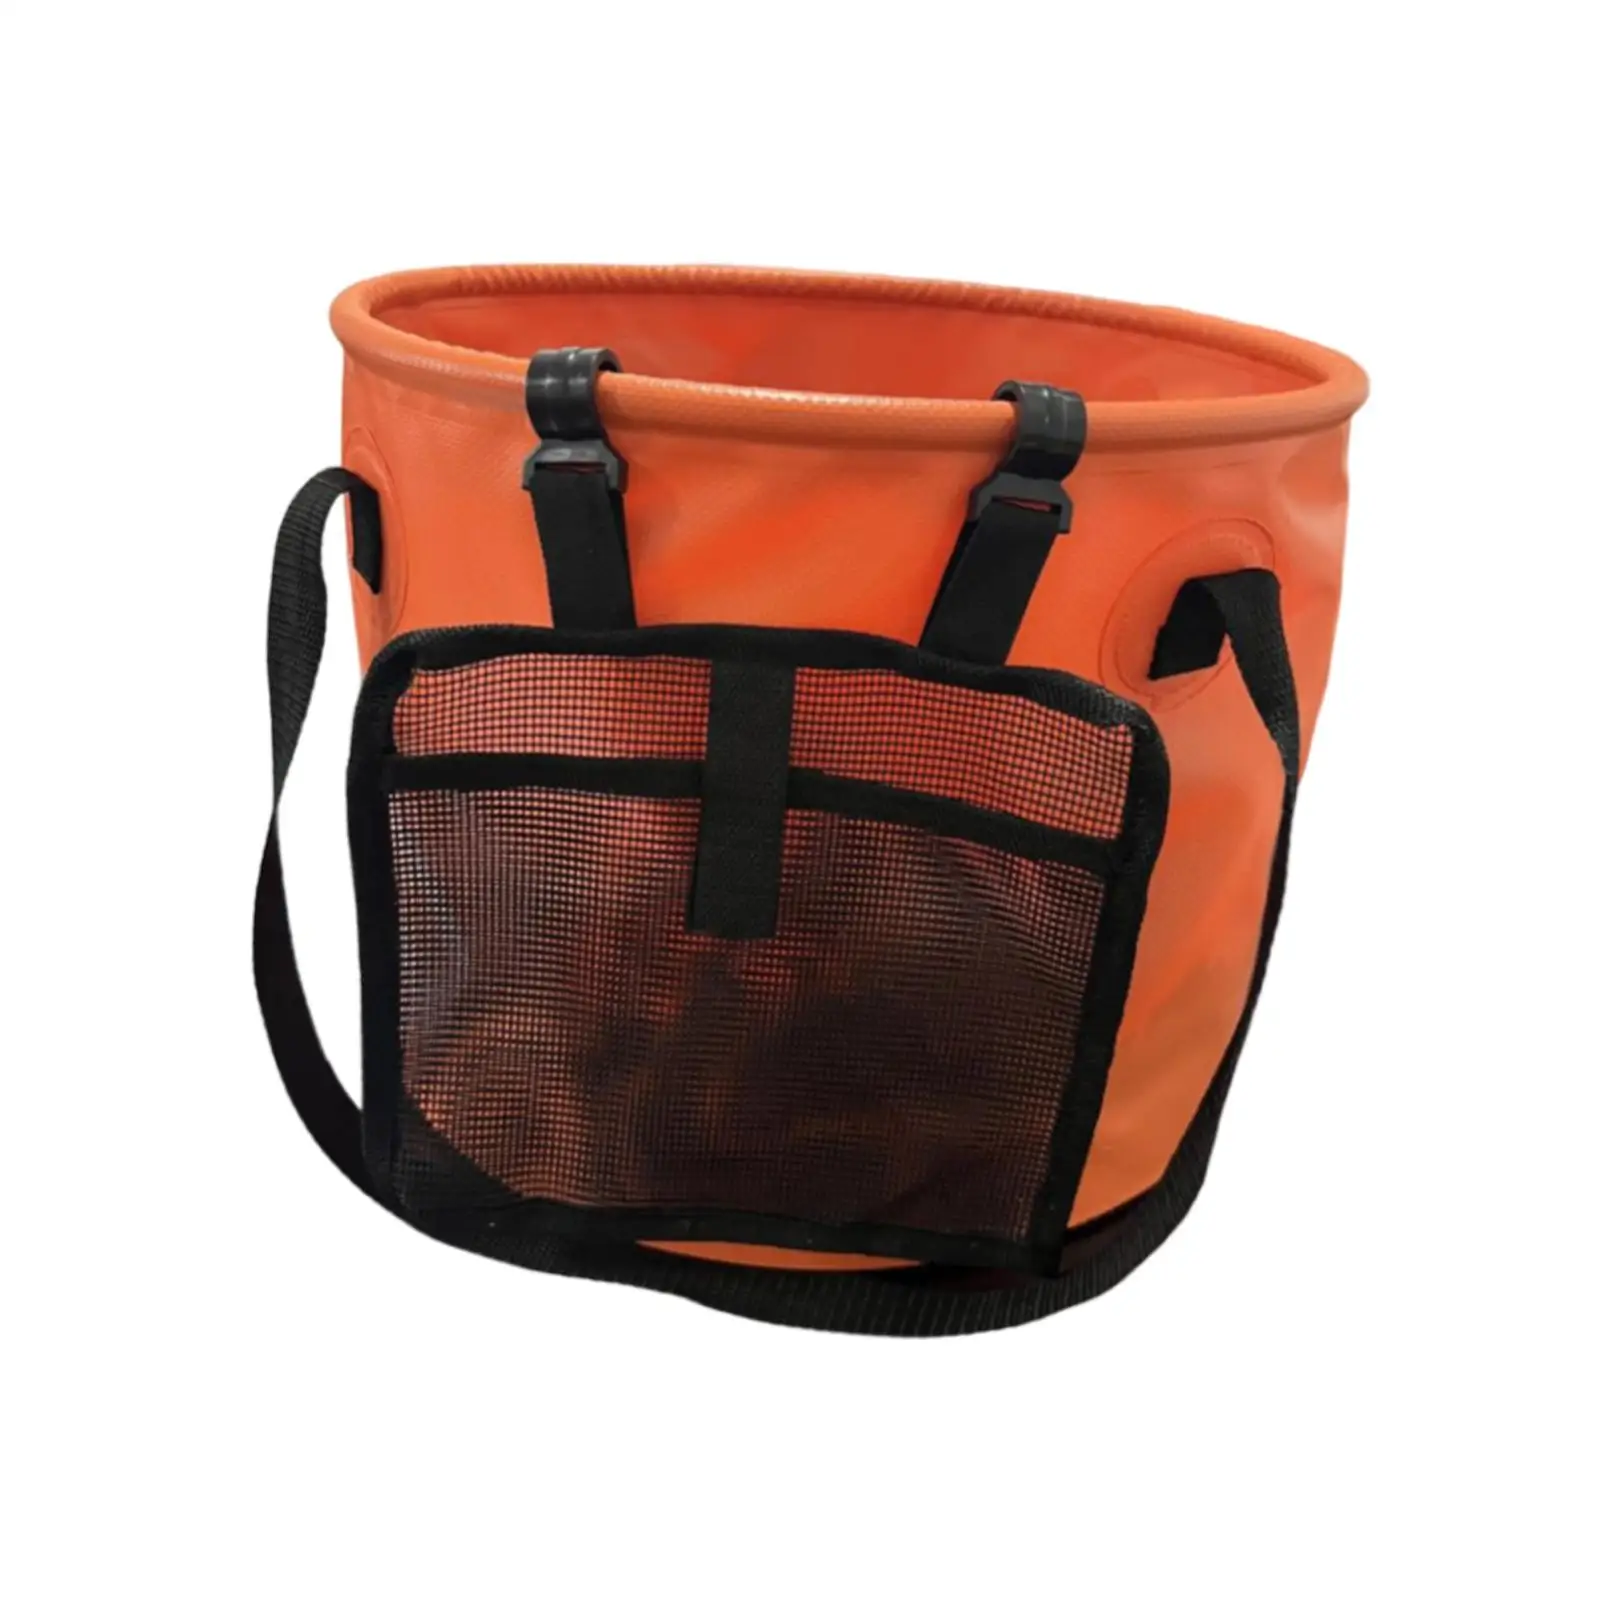 Water Container Portable Collapsible Bucket for Hiking Car Washing Boating